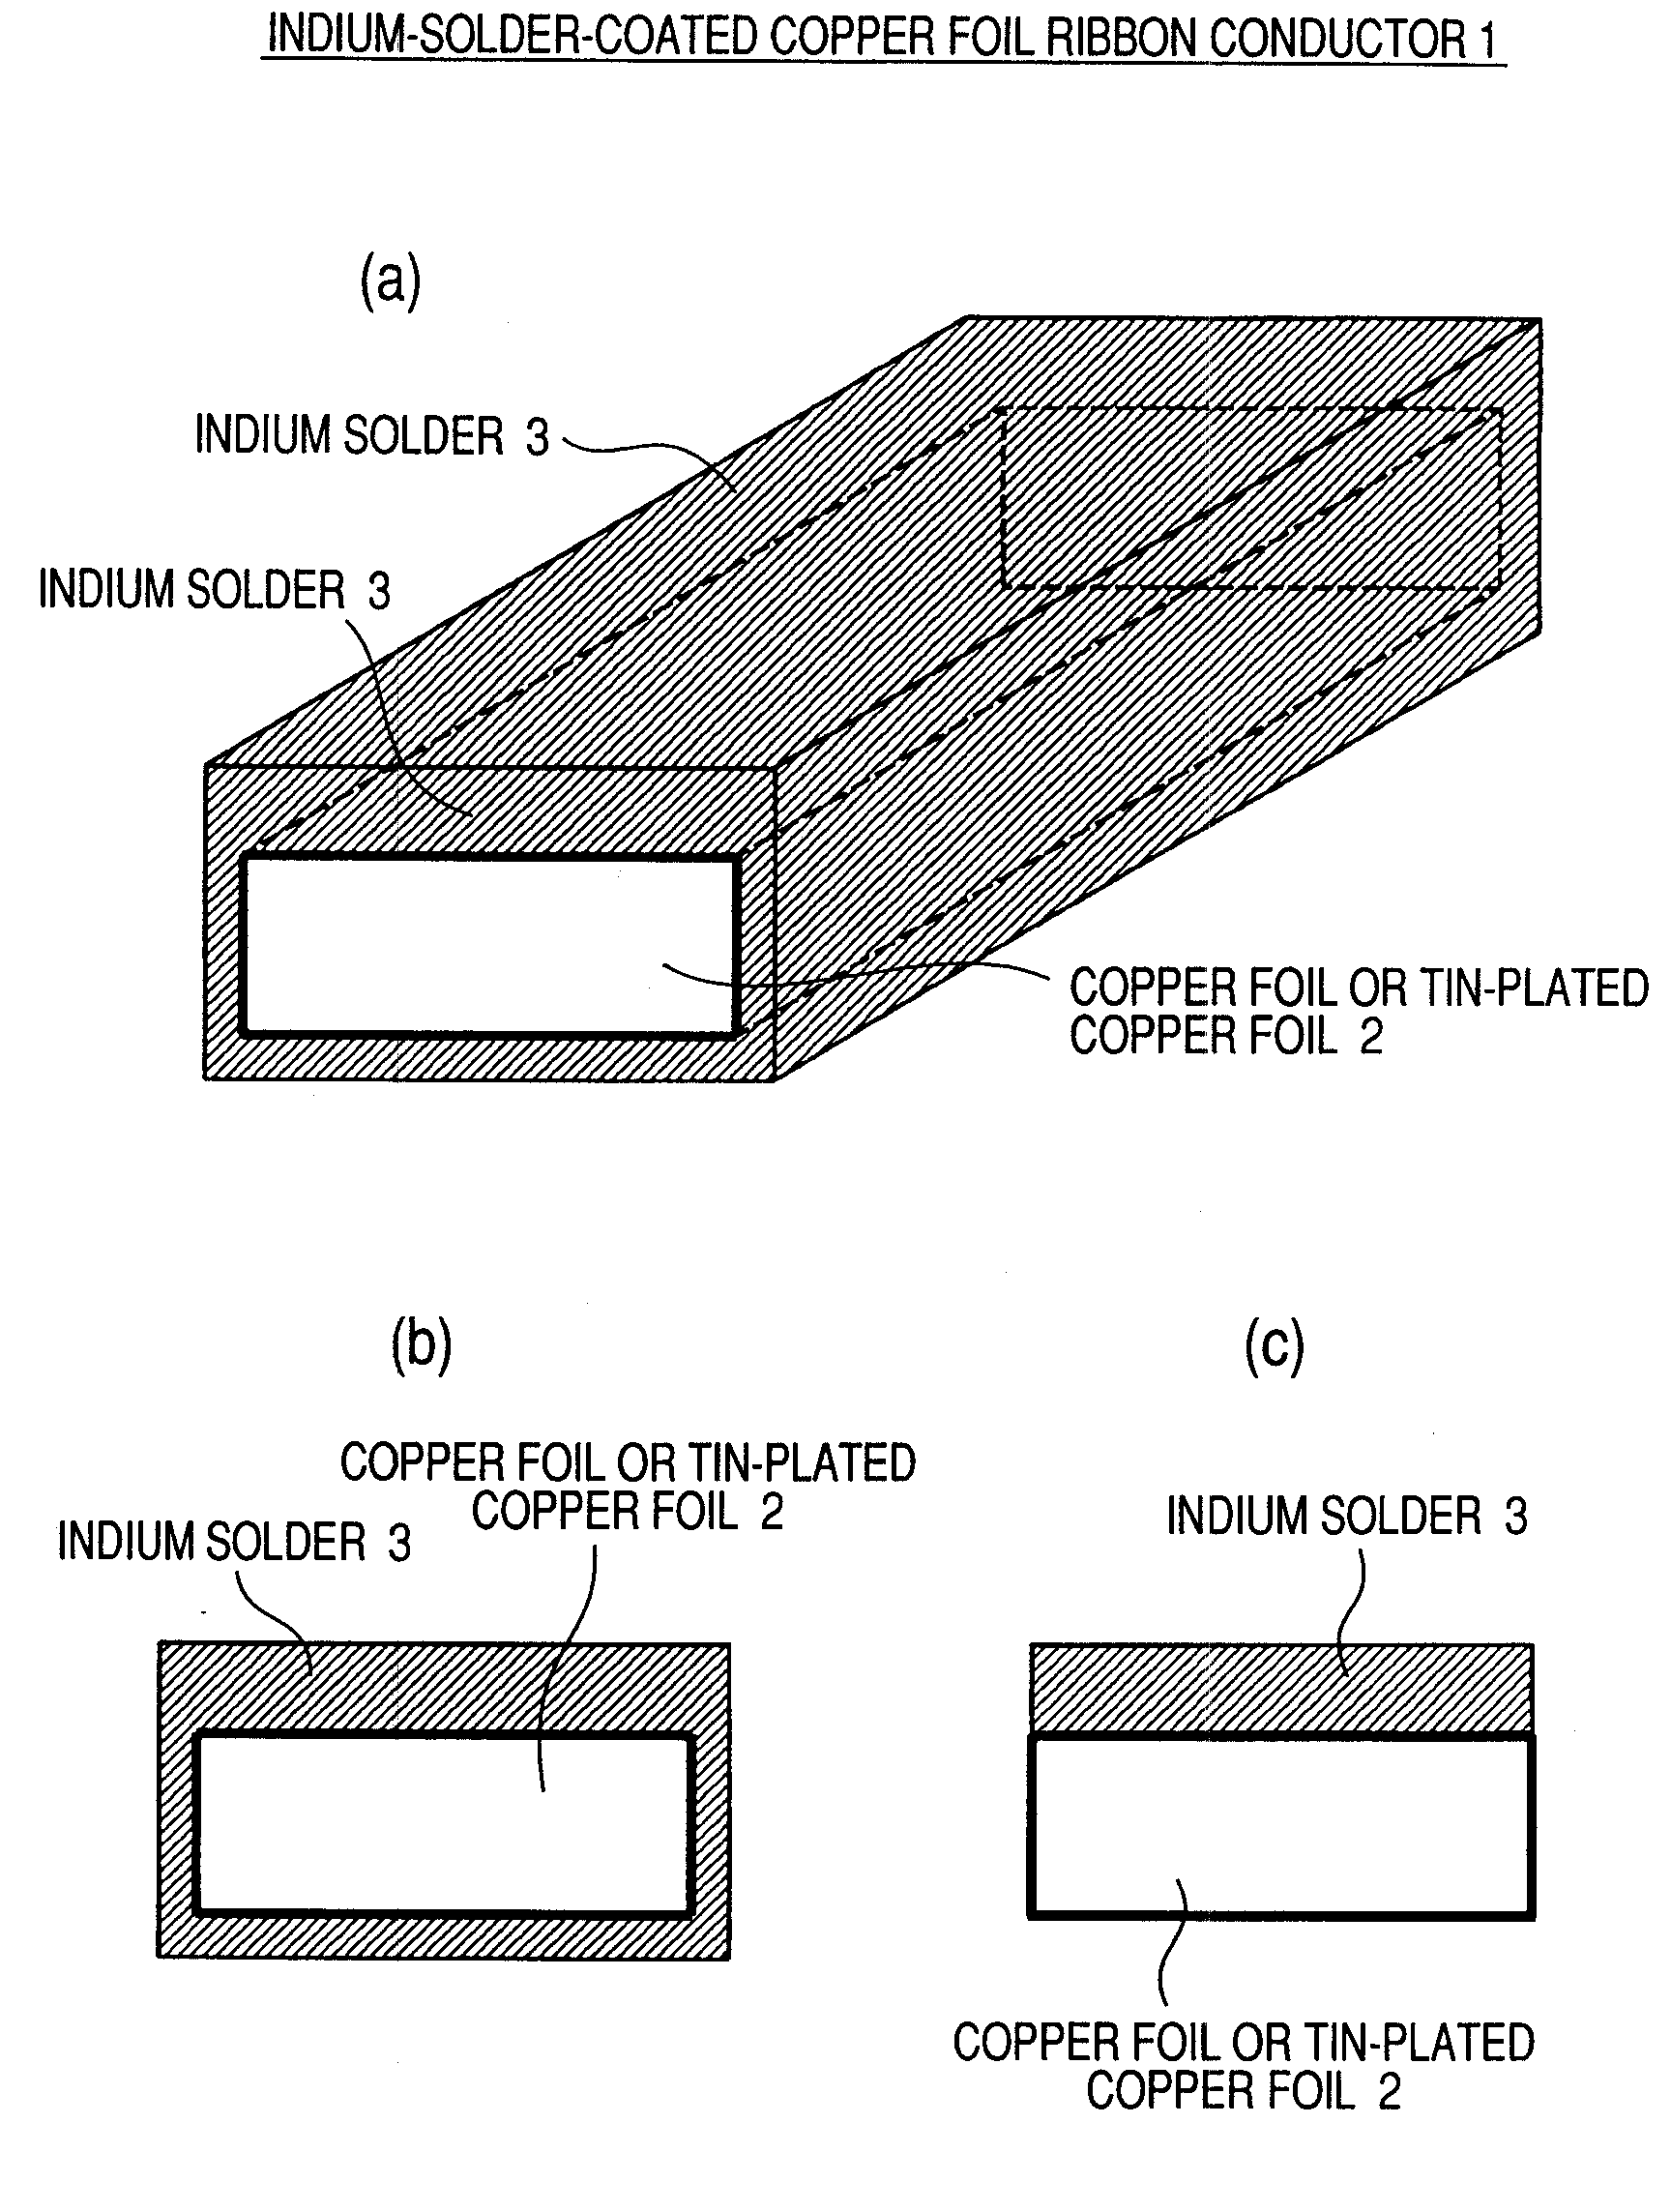 Indium-solder-coated copper foil ribbon conductor and method of connecting the same